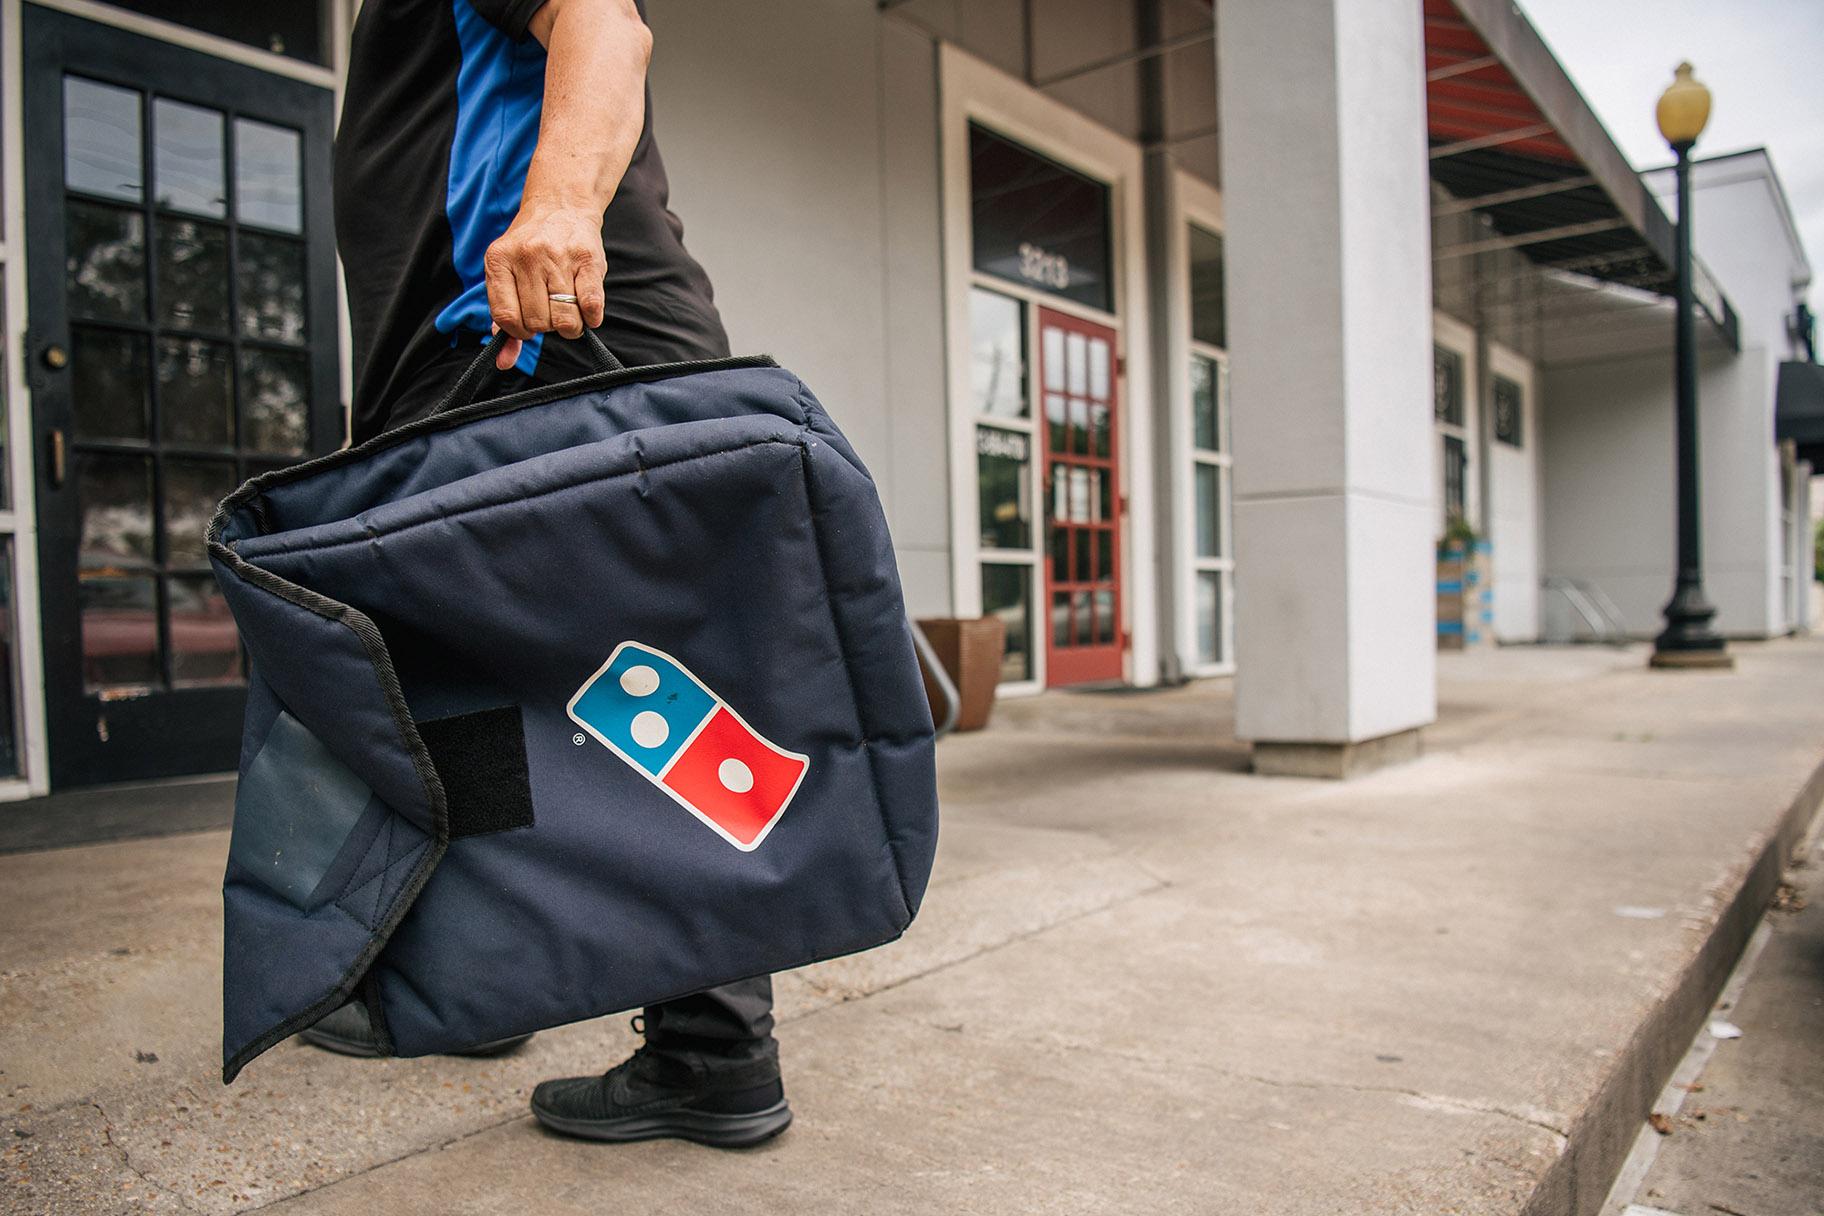 Domino’s Pizza is taking on delivery apps that charge extra fees with a new giveaway totaling $50 million worth of free food. (Brandon Bell / Getty Images)